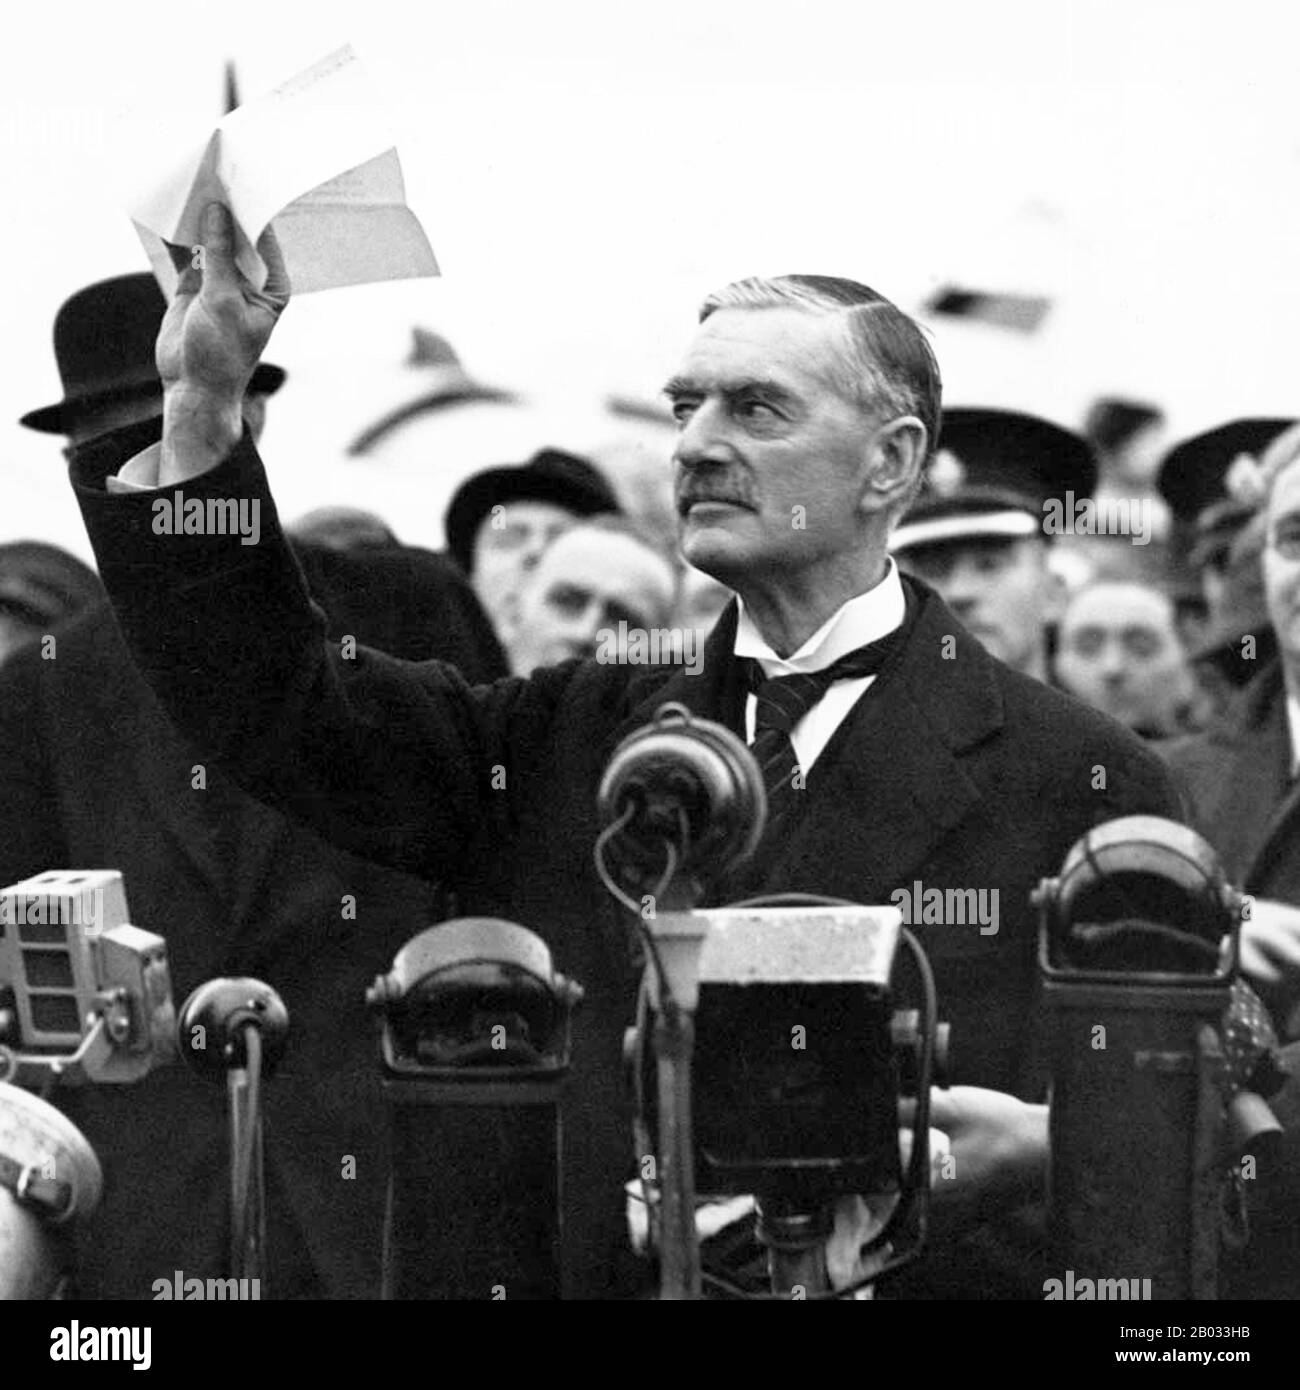 Arthur Neville Chamberlain FRS (18 March 1869 – 9 November 1940) was a British Conservative politician who served as Prime Minister of the United Kingdom from May 1937 to May 1940.  Chamberlain is best known for his appeasement foreign policy, and in particular for his signing of the Munich Agreement in 1938, conceding the German-speaking Sudetenland region of Czechoslovakia to Germany. However, when Adolf Hitler later invaded Poland, the UK declared war on Germany on 3 September 1939, and Chamberlain led Britain through the first eight months of World War II. Stock Photo